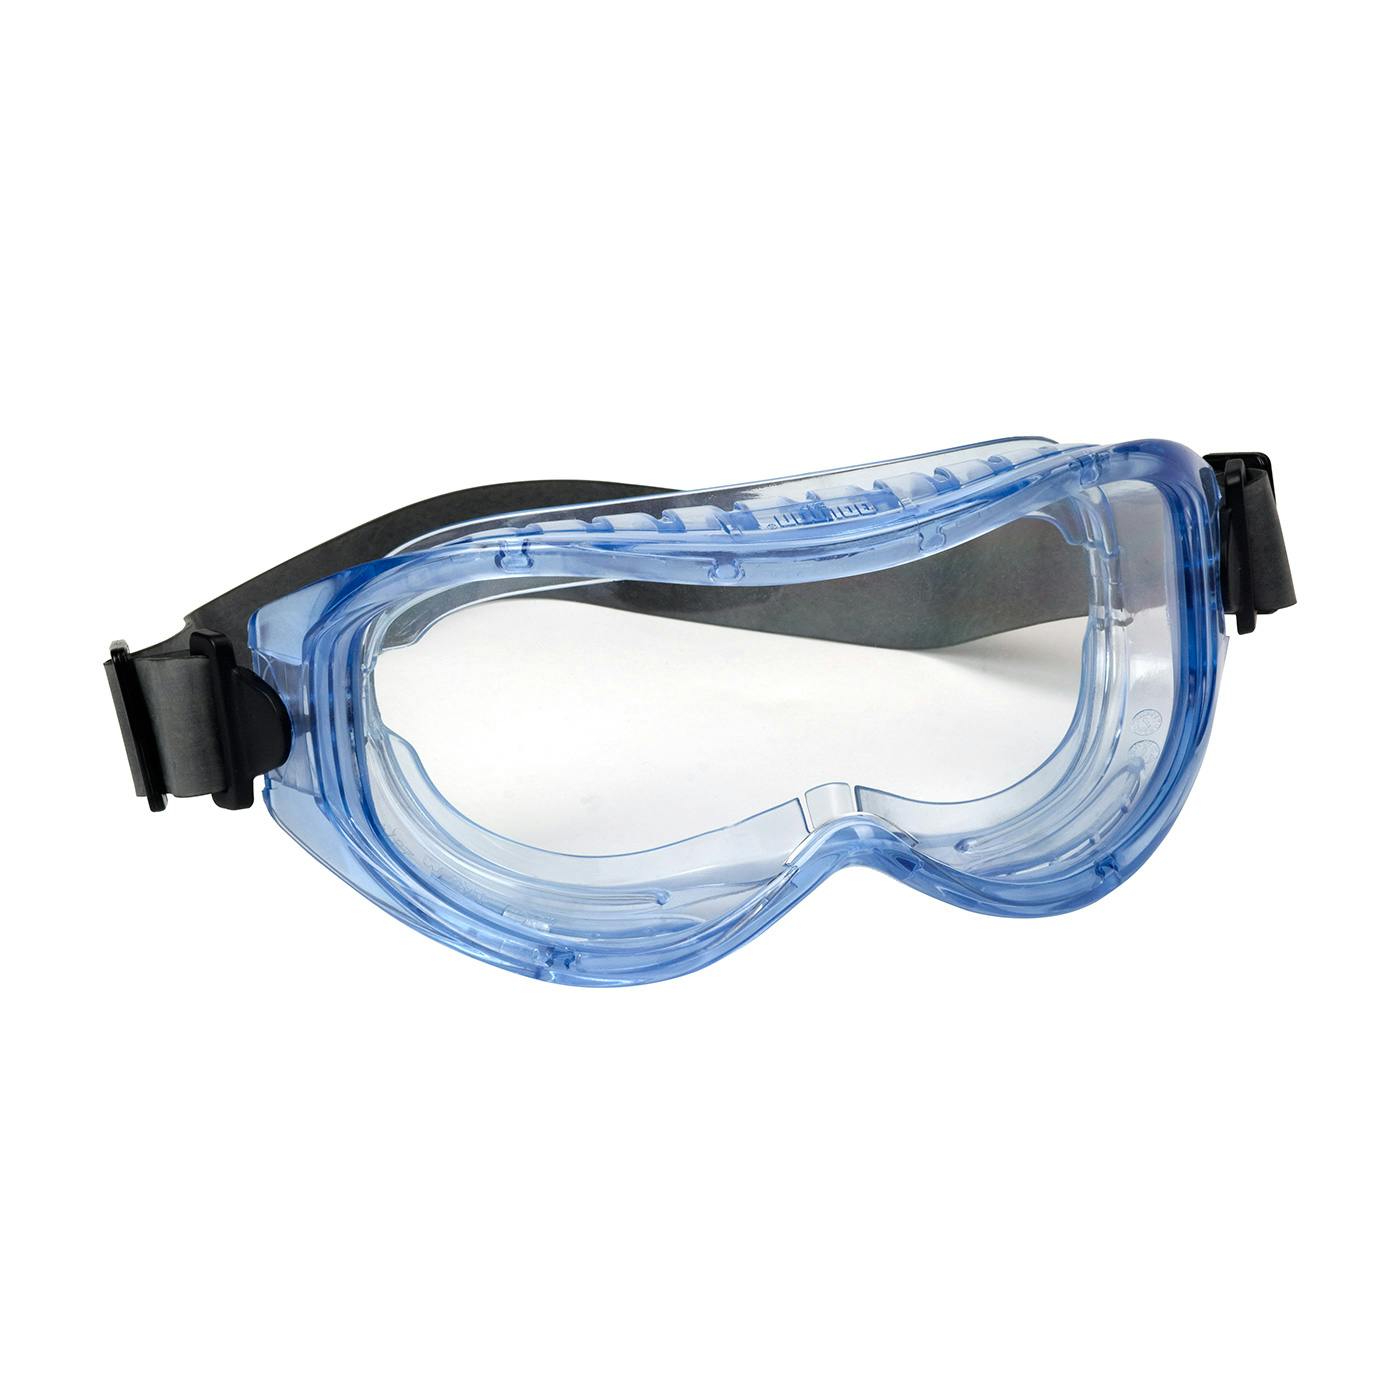 Indirect Vent Goggle with Light Blue Body, Clear Lens and Anti-Scratch / Anti-Fog Coating - Neoprene Strap, Light Blue (251-5300-400-RHB) - OS_0